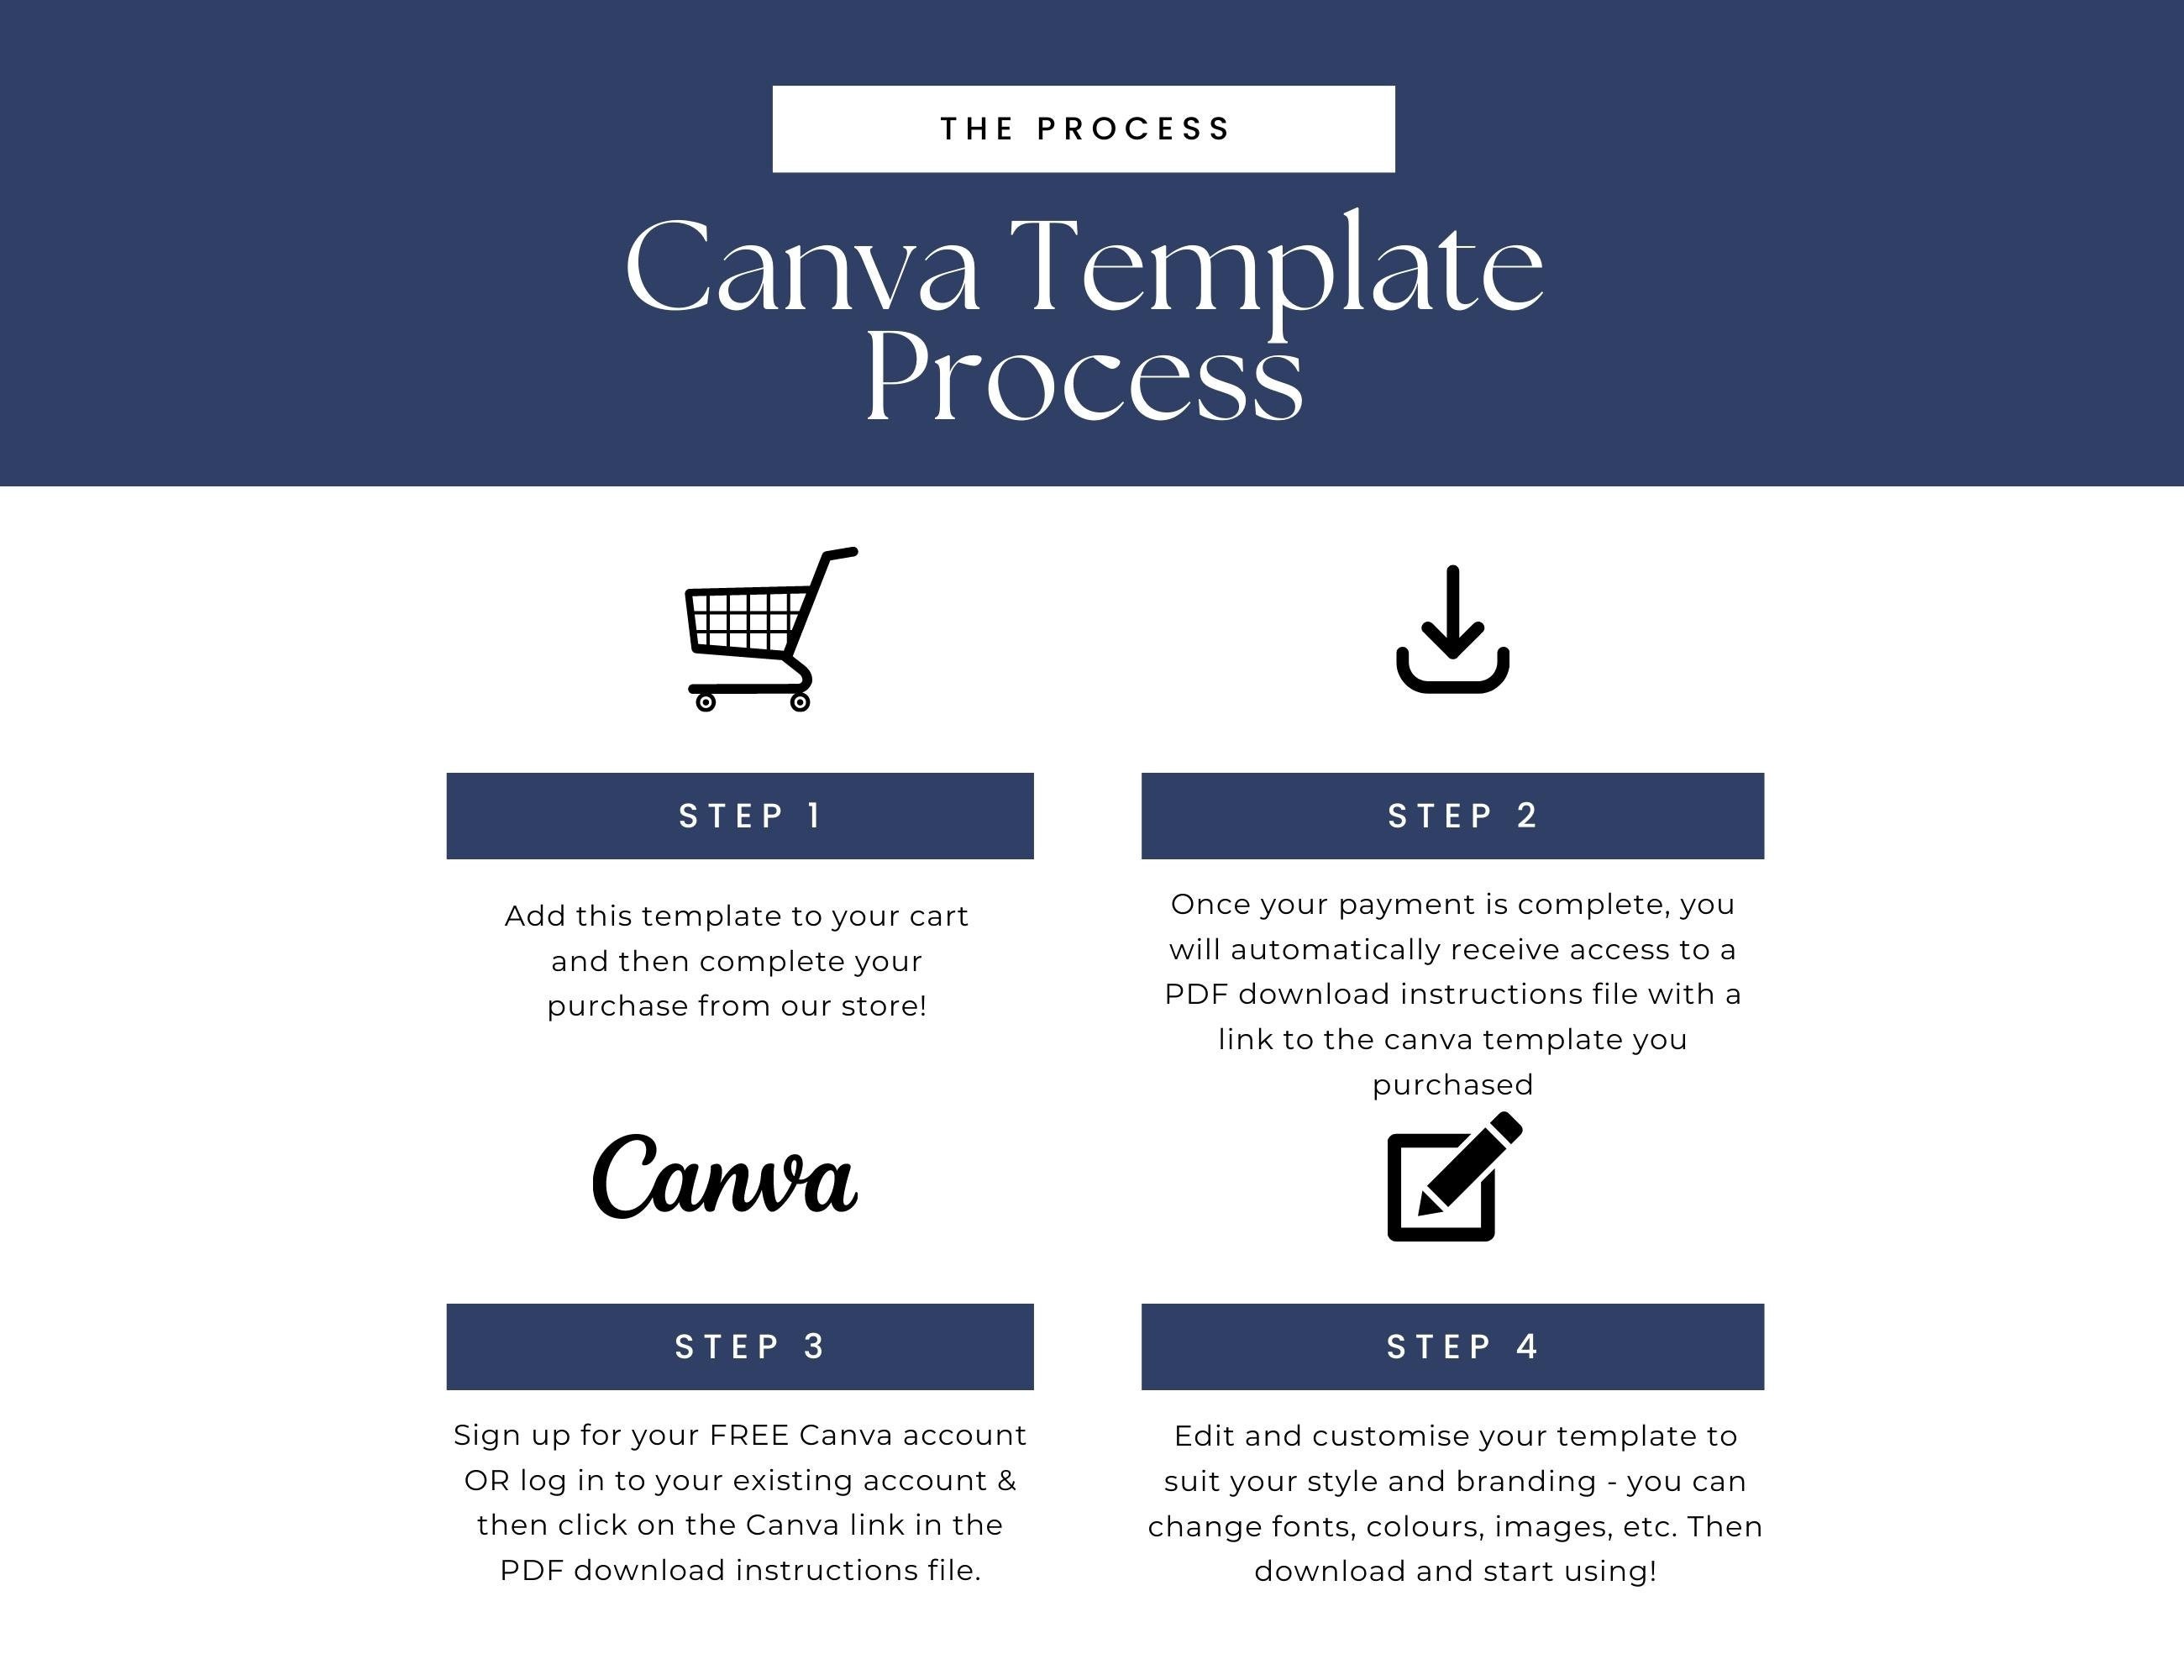 Travel Agency Business Plan CANVA TEMPLATE Business Proposal - Etsy